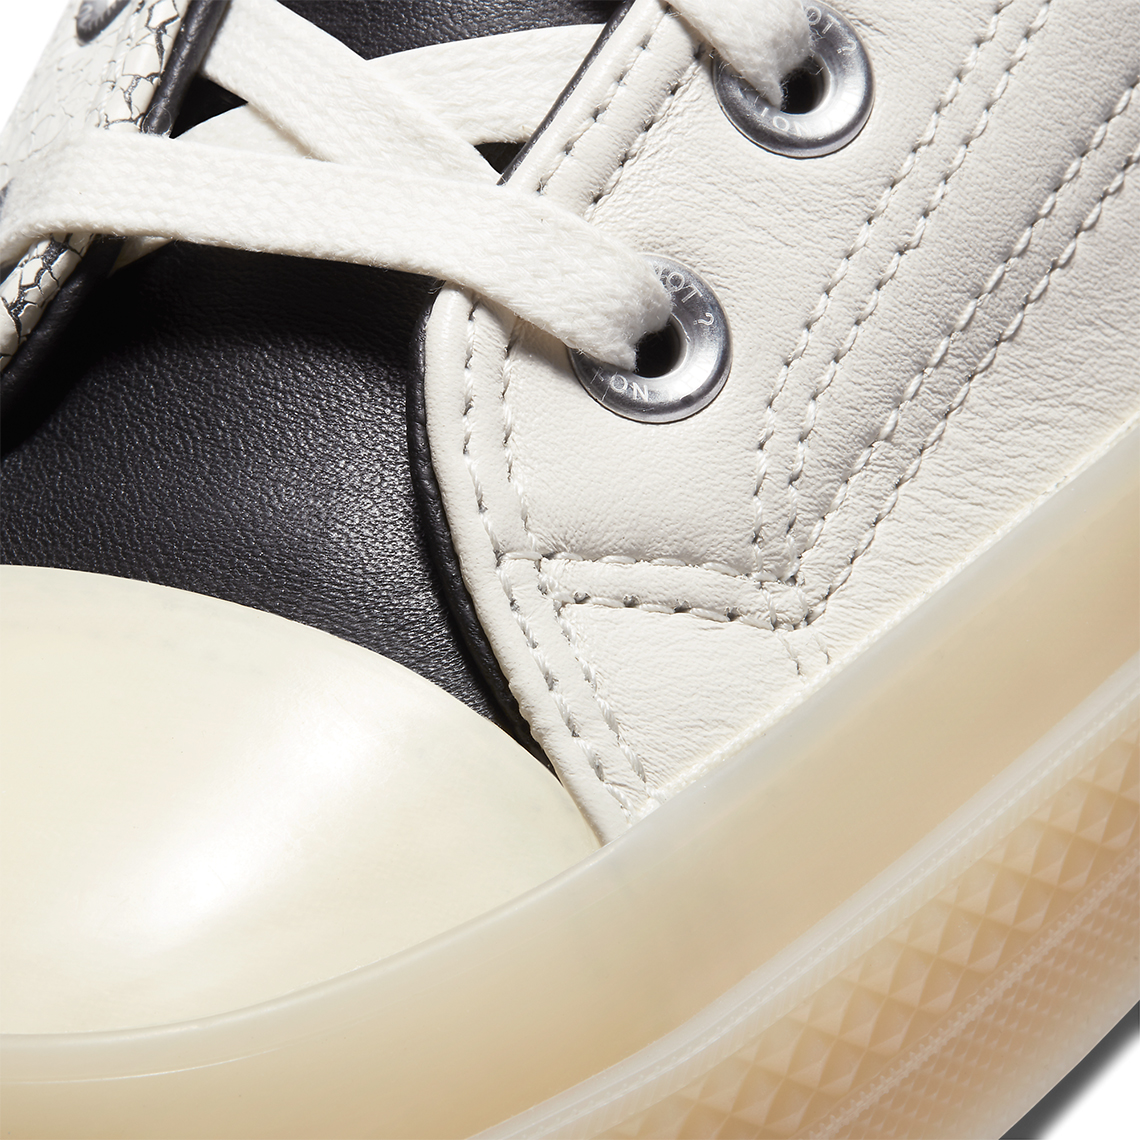 Russell Westbrook x Converse Chuck 70 “Why Not?” tounge, toebox close up